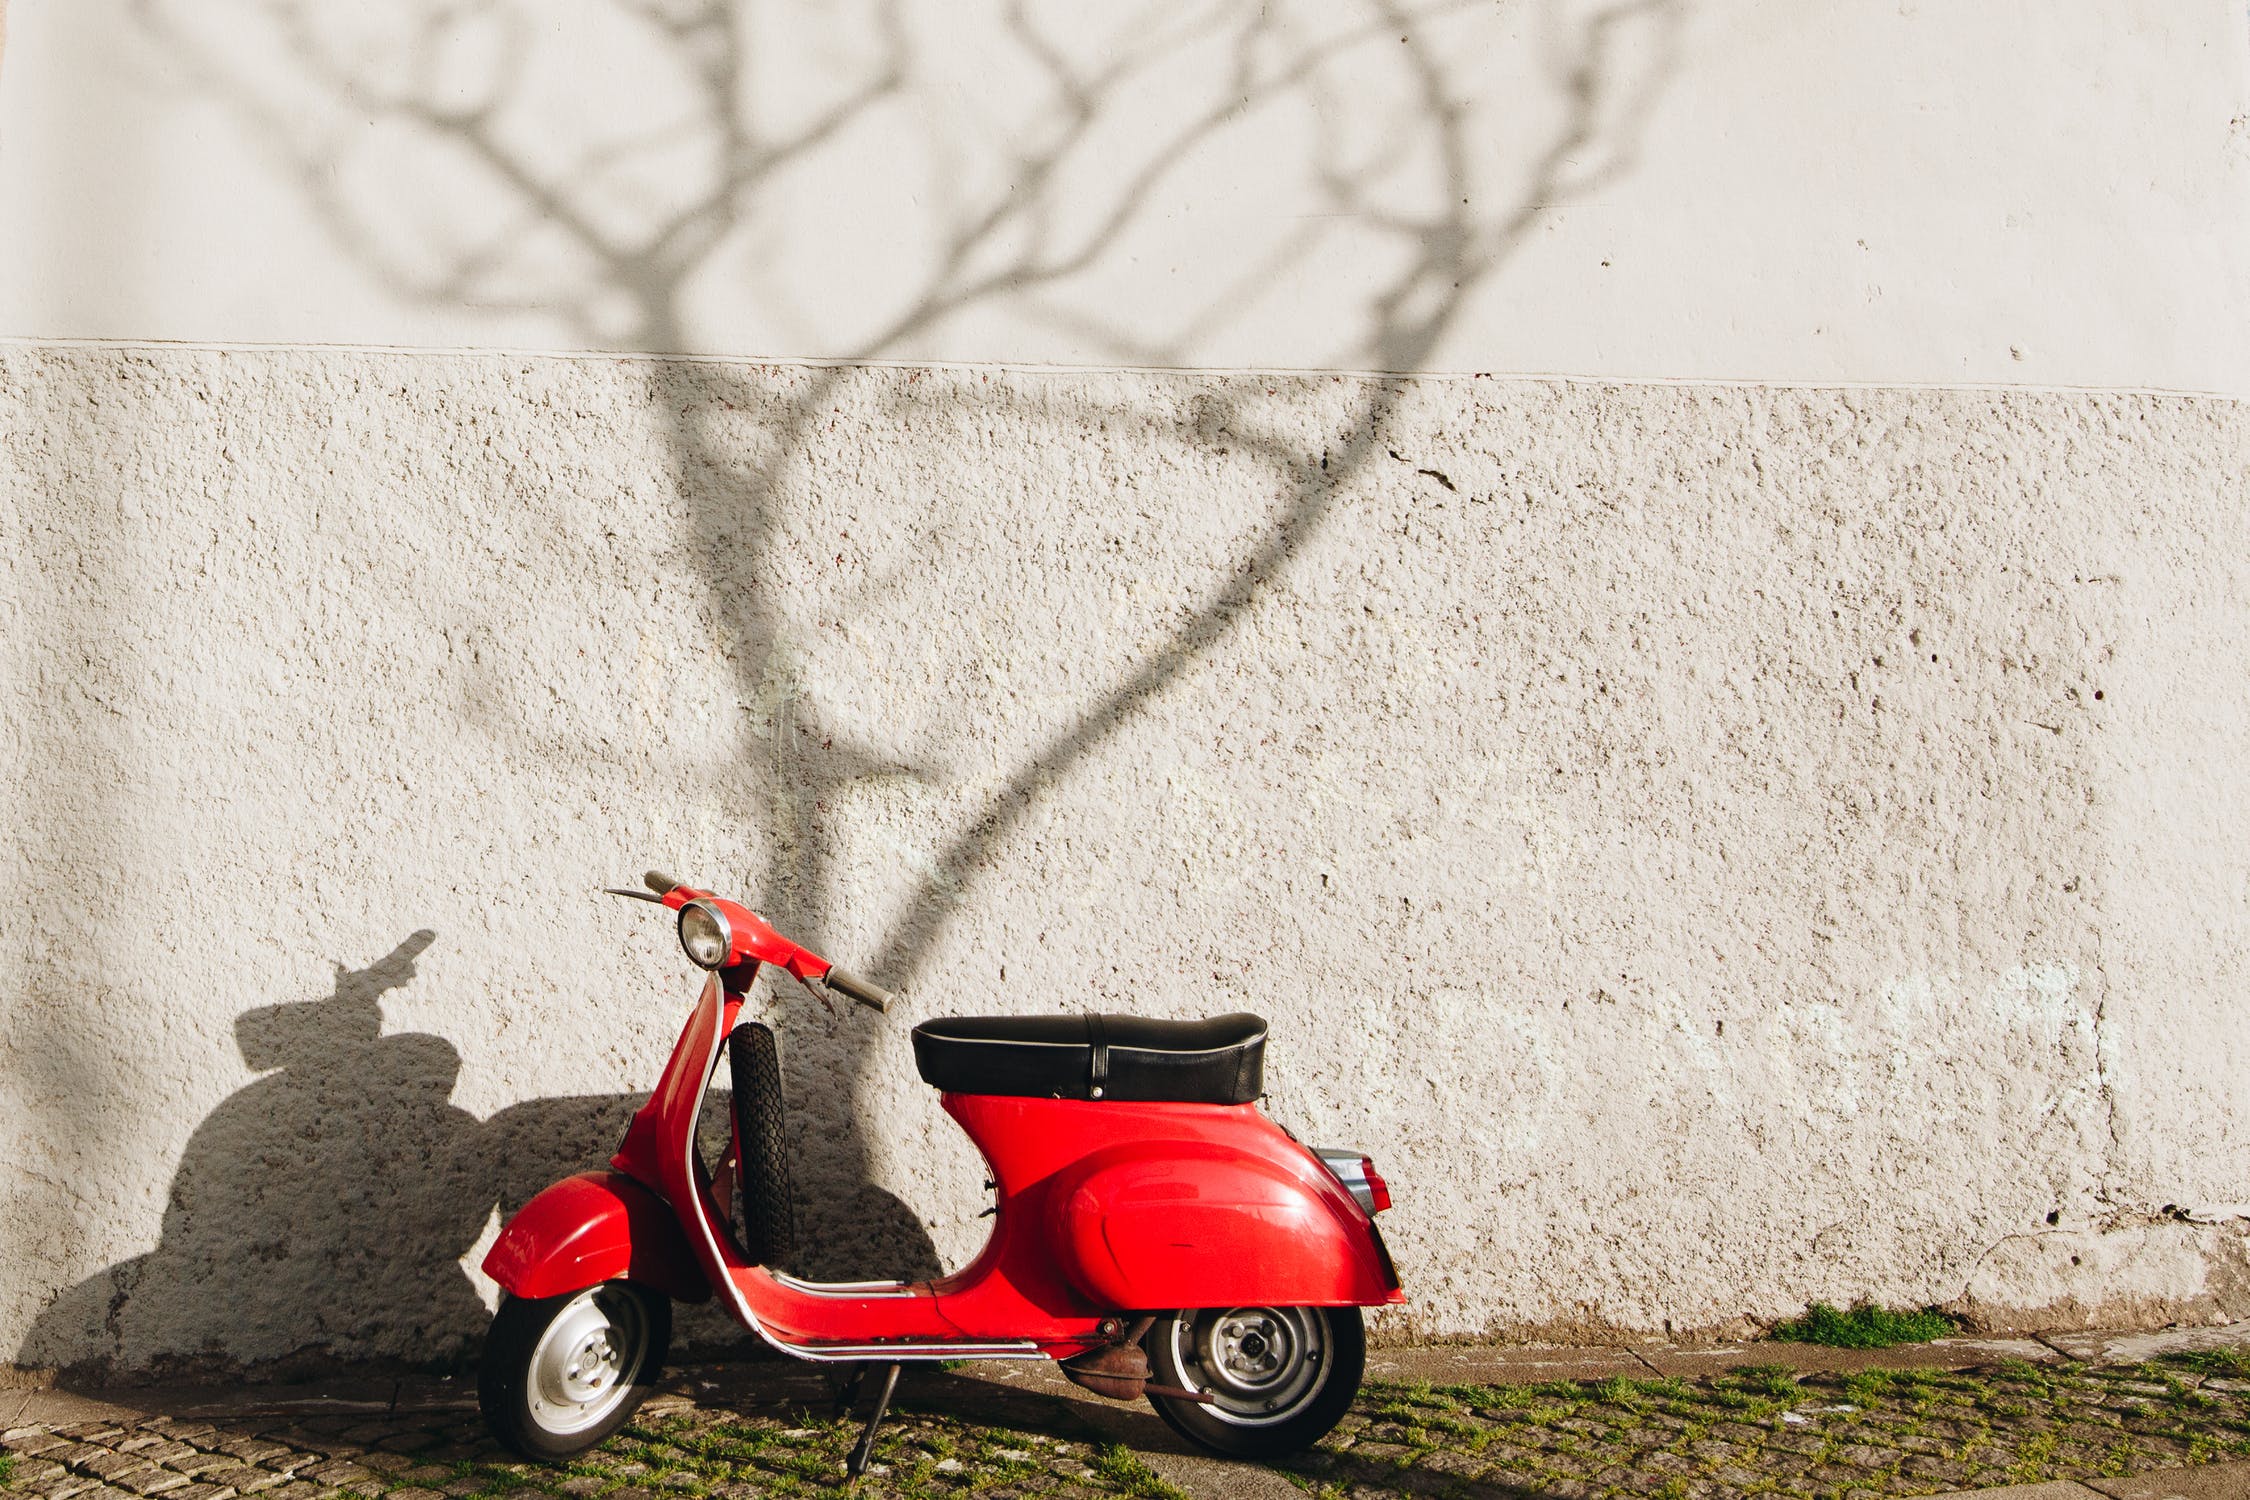 Vespa in Tuscany - Whats The Best Time To Travel To Tuscany